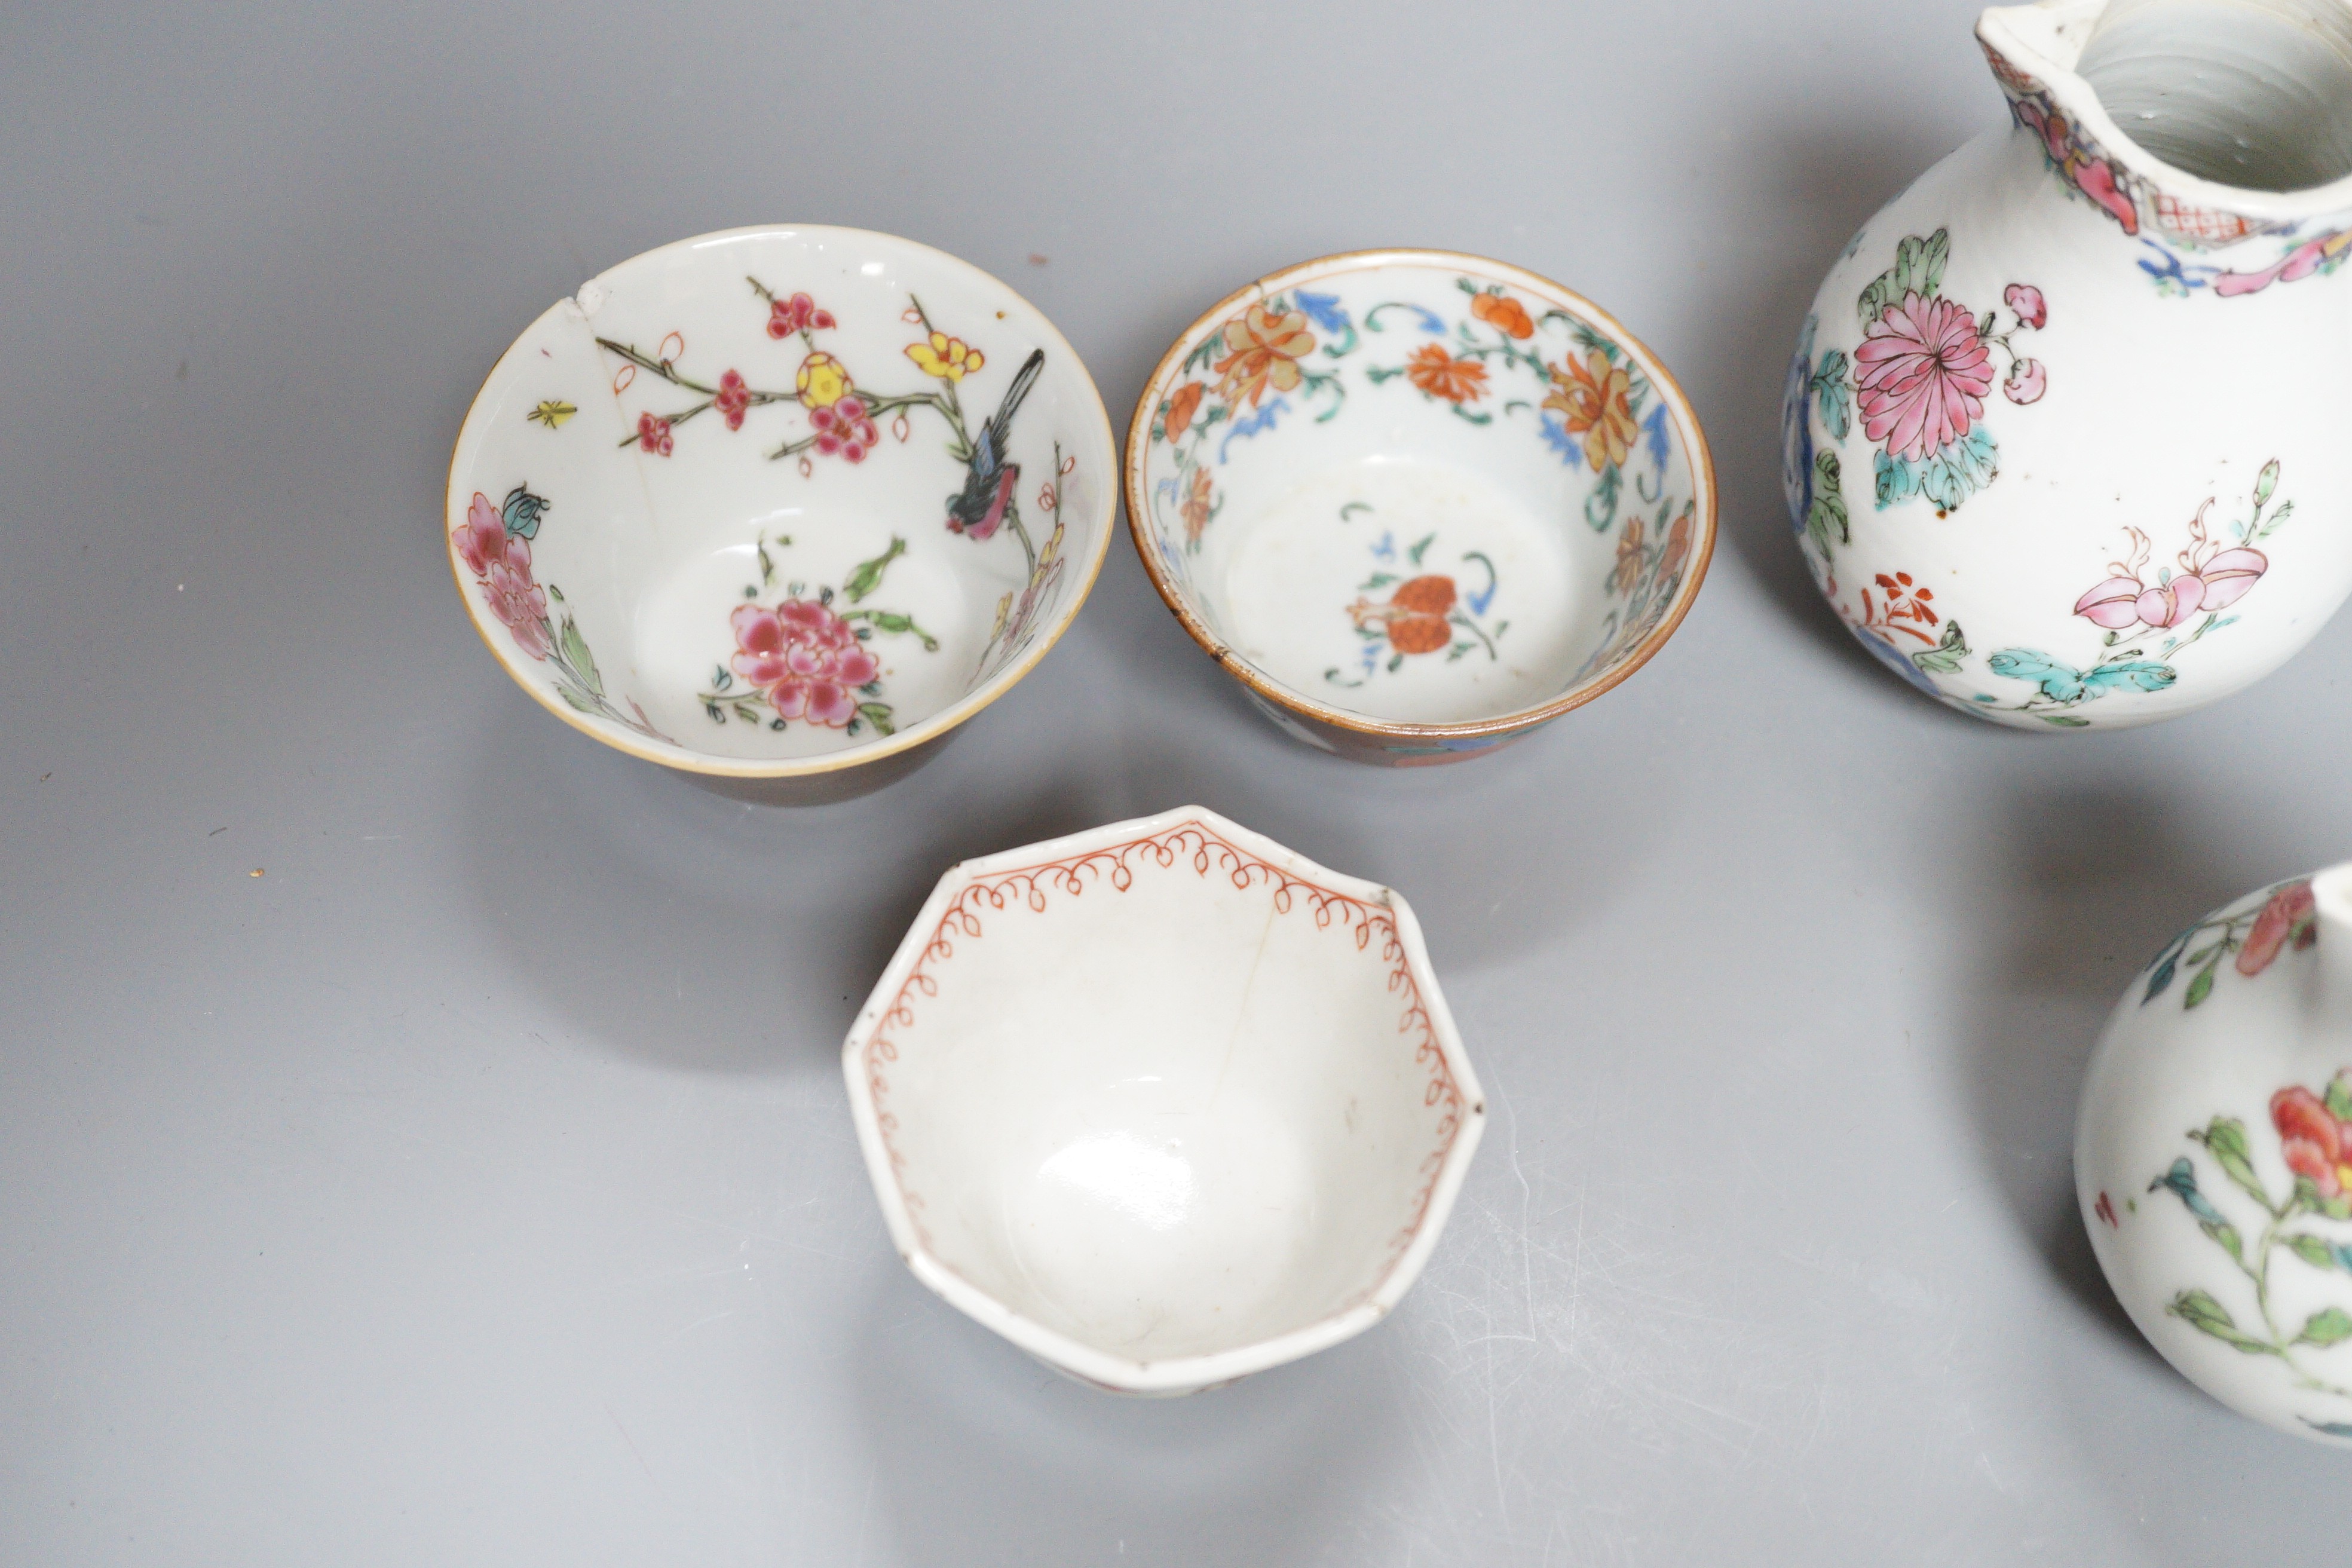 Three Chinese export famille rose cream jugs, one with pierced cover and three small bowls, 18th century and later